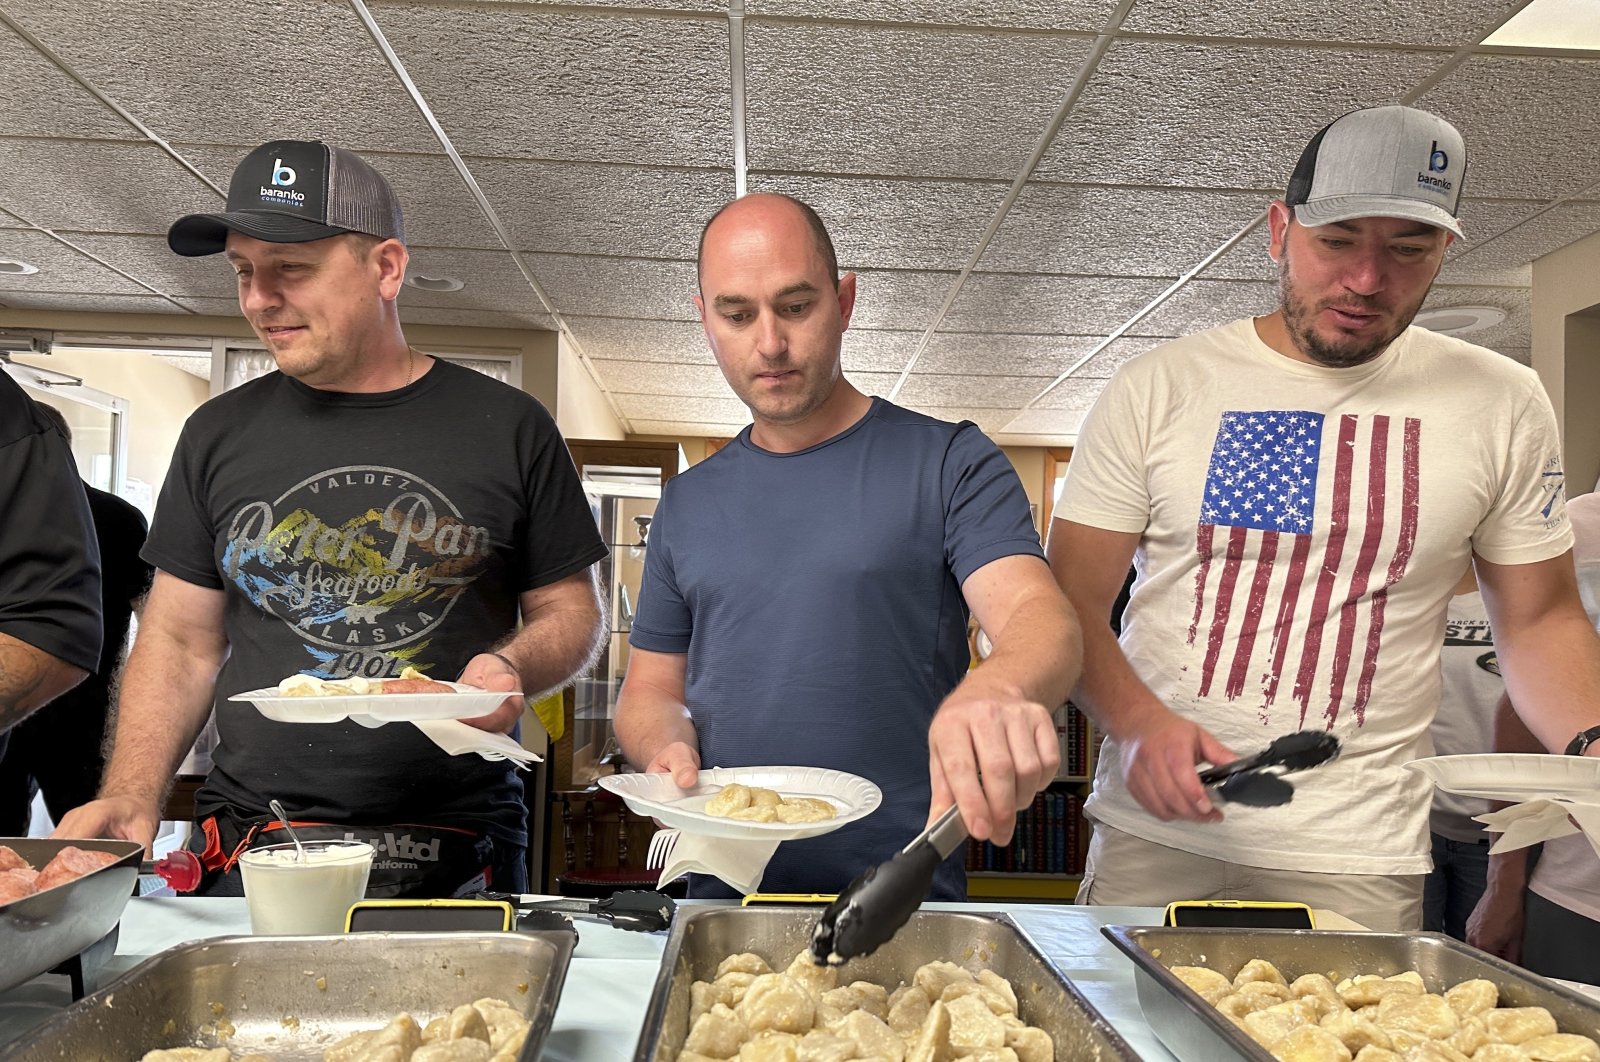 Maksym Bunchukov (L), Andrii Hryshchuk (C) and Ivan Sakivskyi help themselves to perogies at a lunch hosted on July 17, 2023, by the Ukrainian Cultural Institute in Dickinson, North Dakota. (AP Photo)